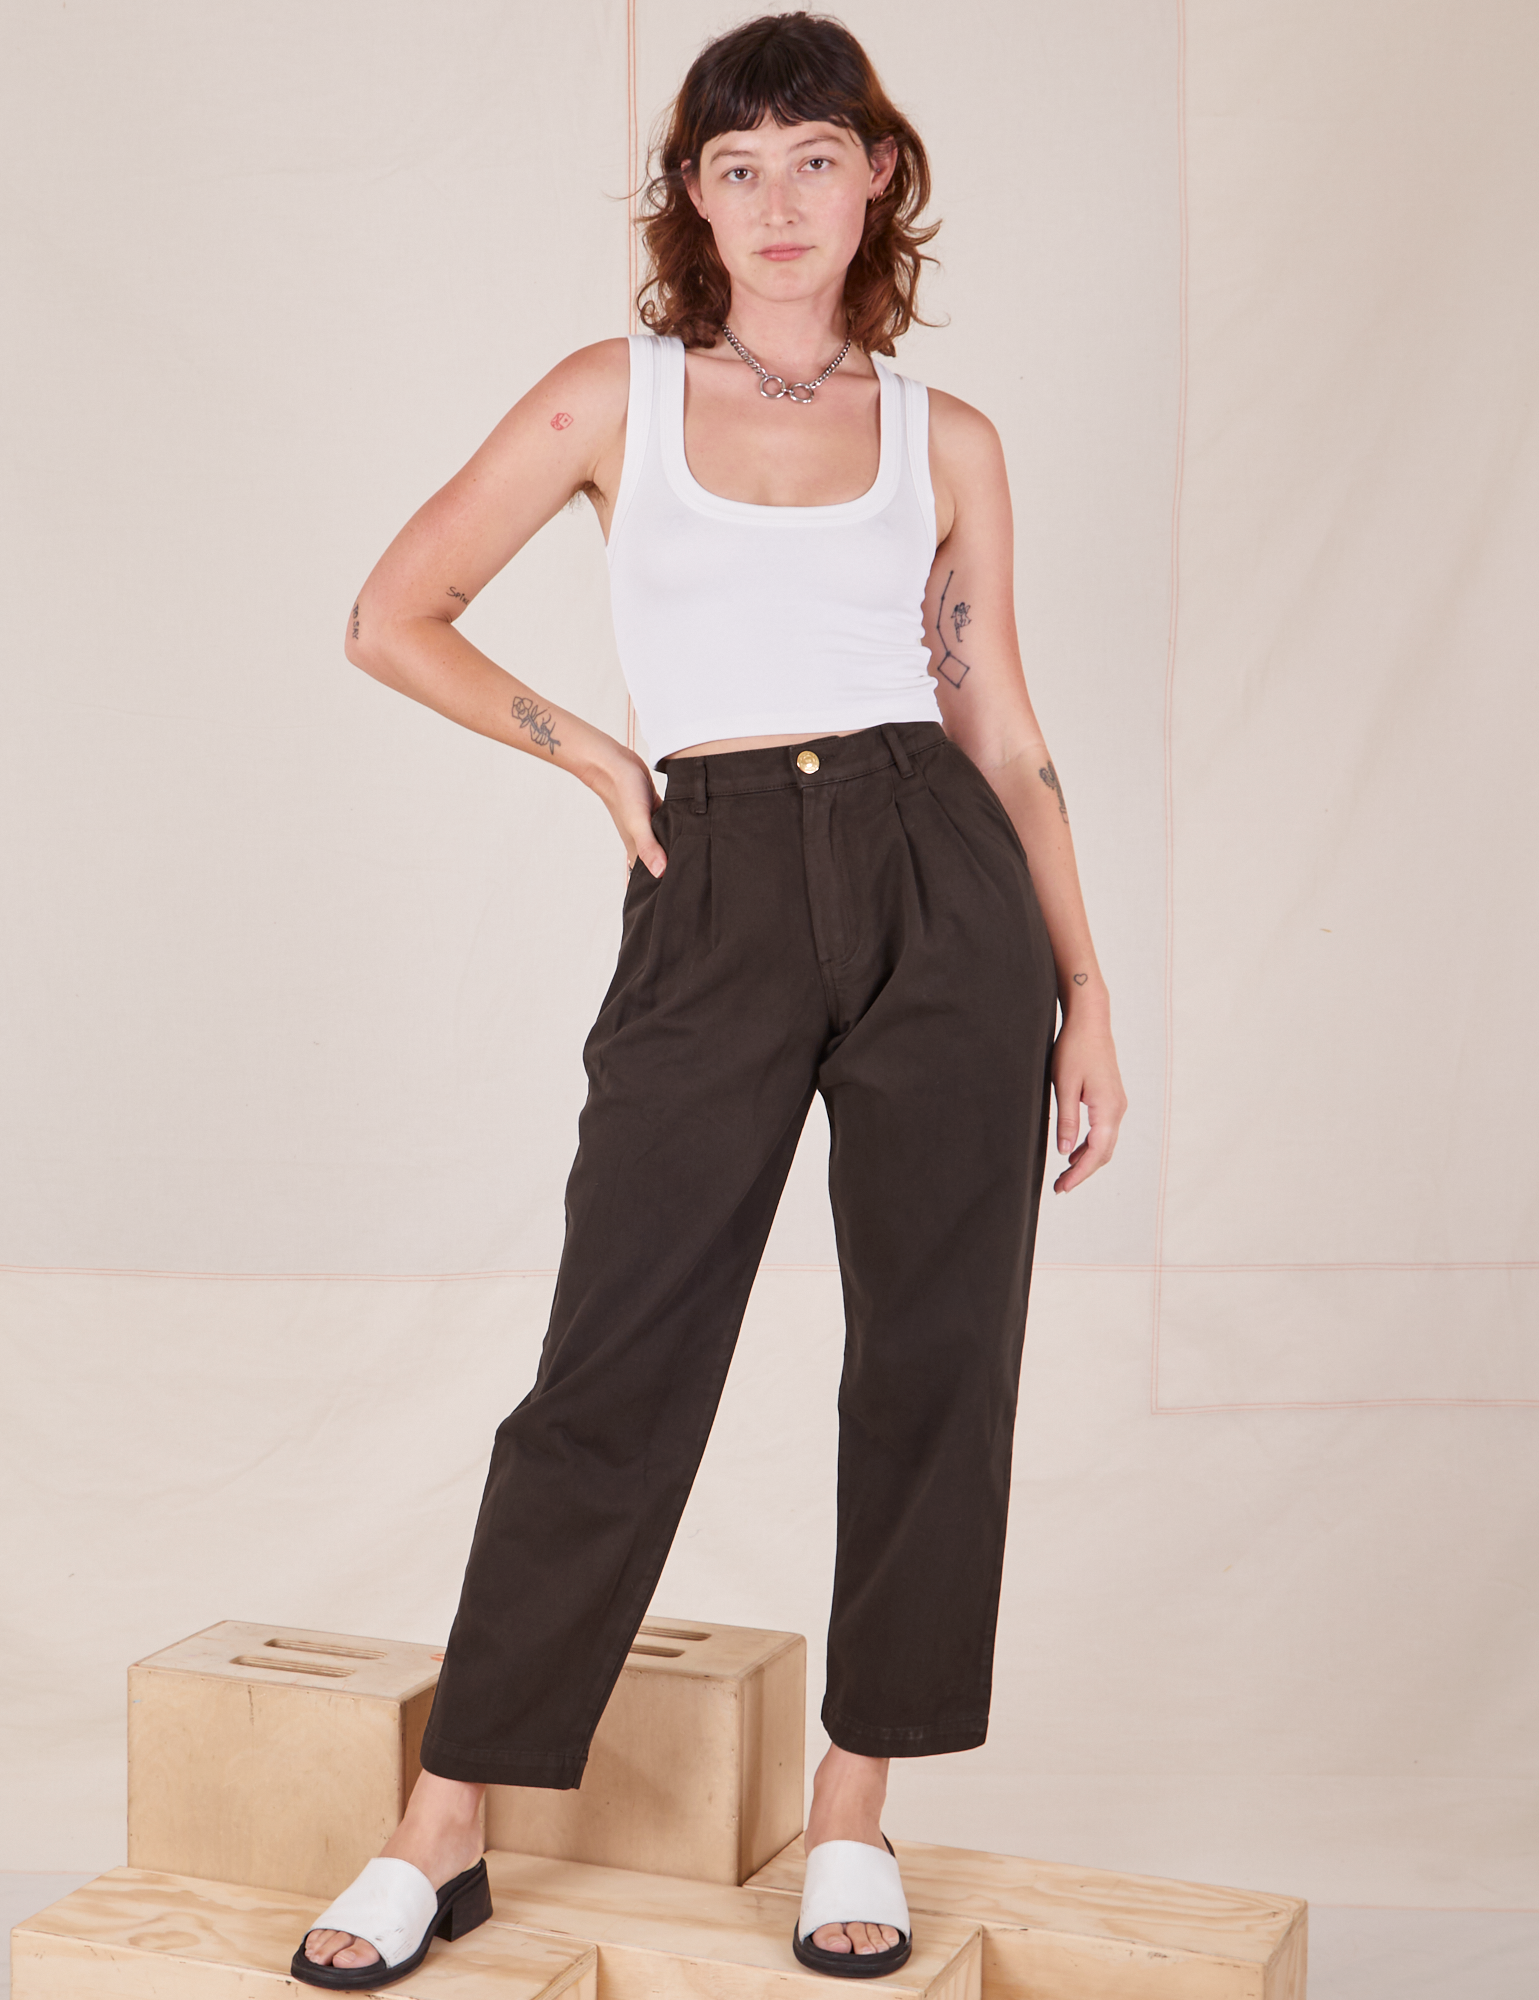 Alex is 5&#39;8&quot; and wearing XXS Heavyweight Trousers in Espresso Brown paired with vintage off-white Cropped Tank Top